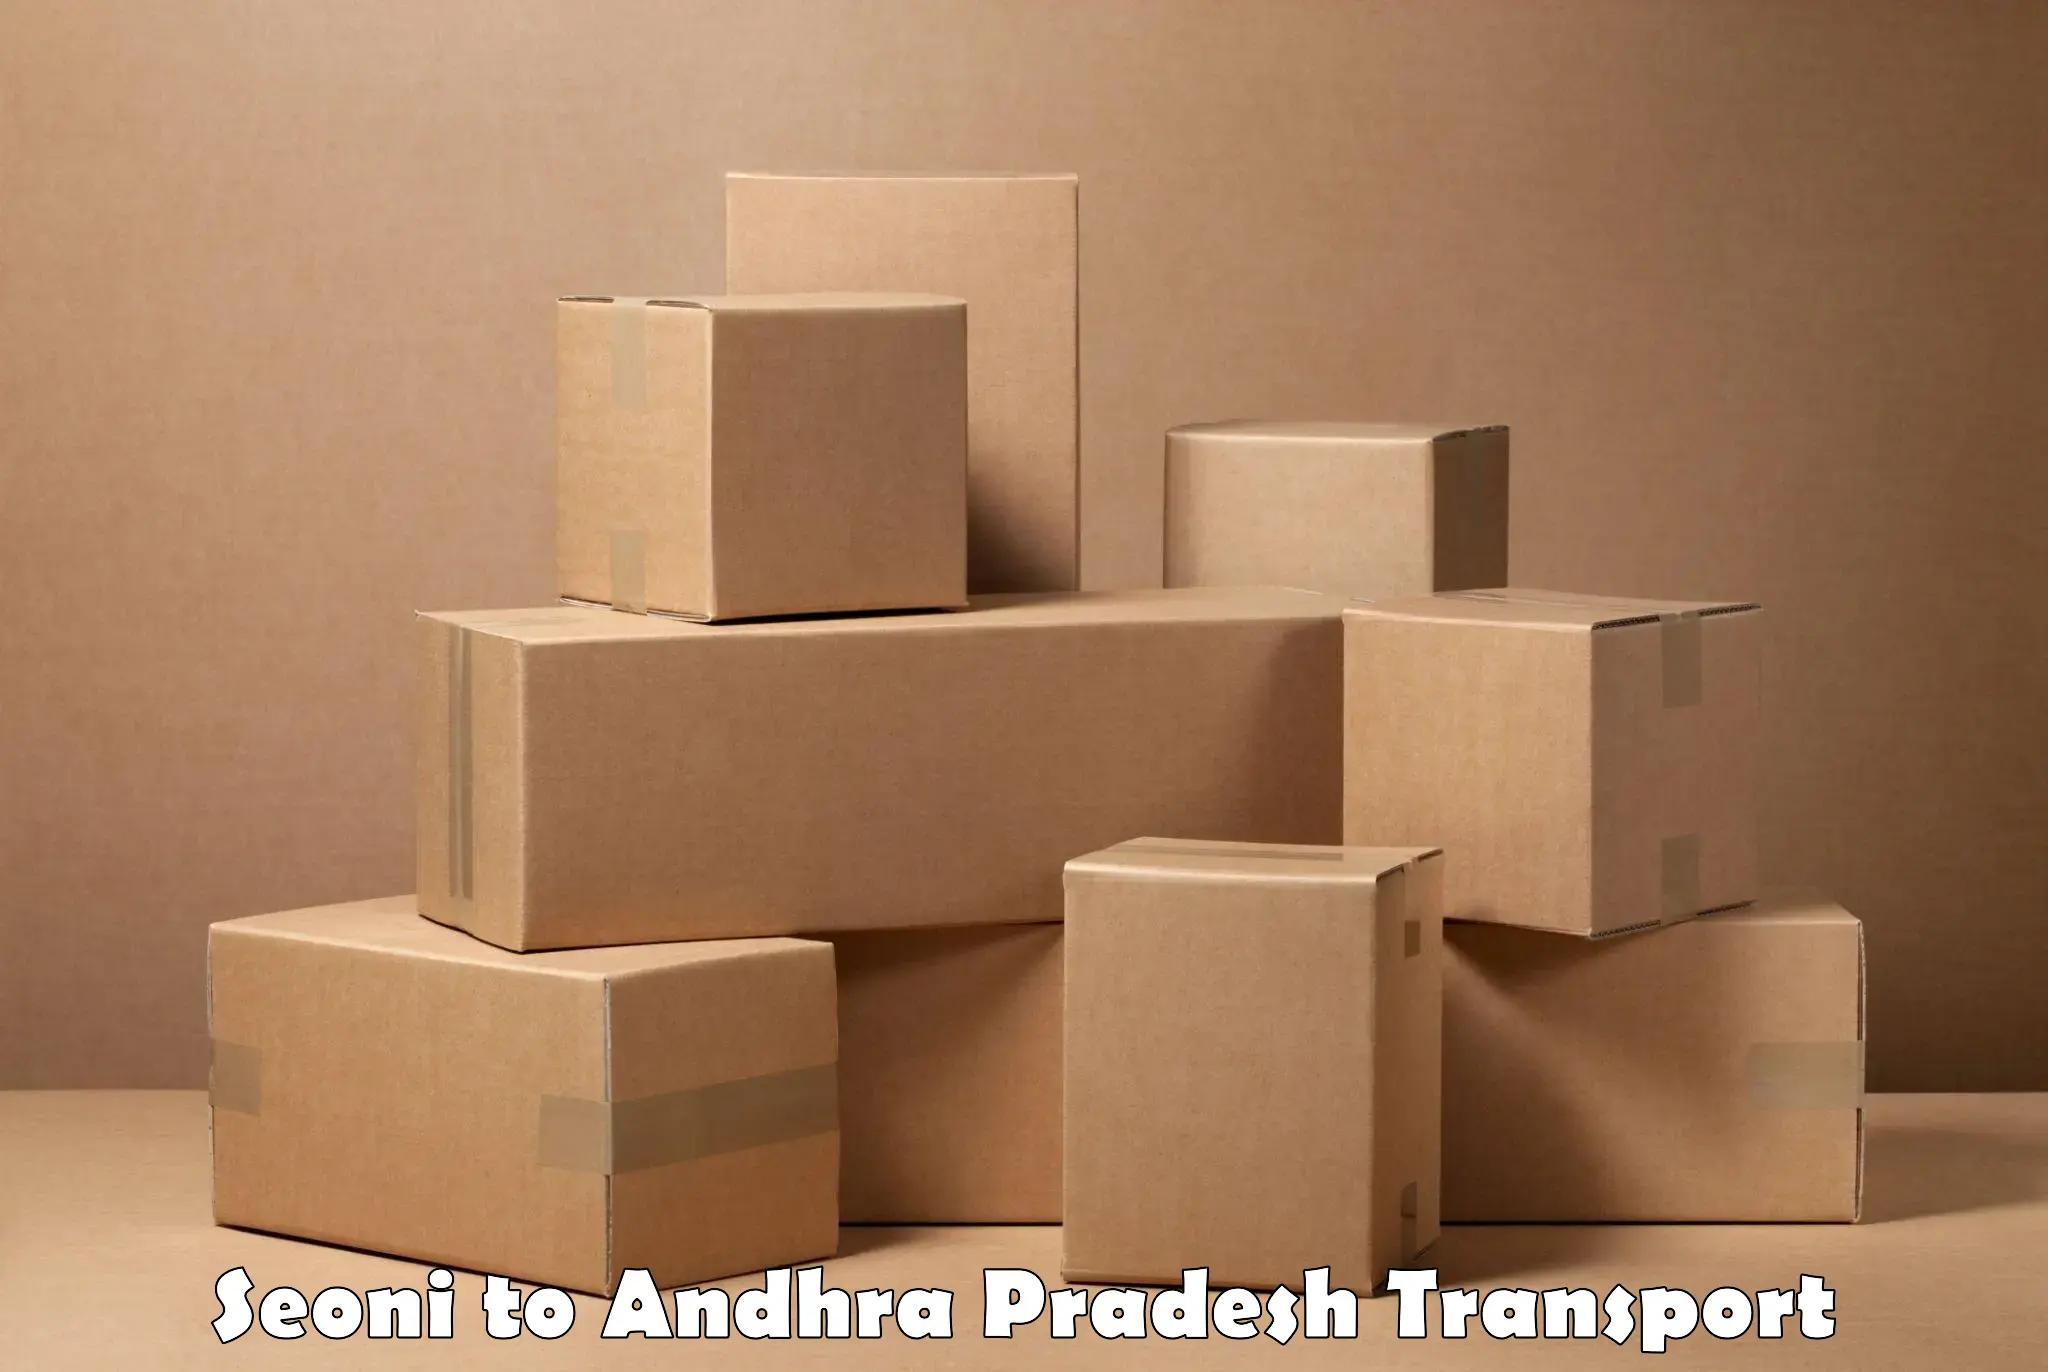 Express transport services Seoni to Anantapur